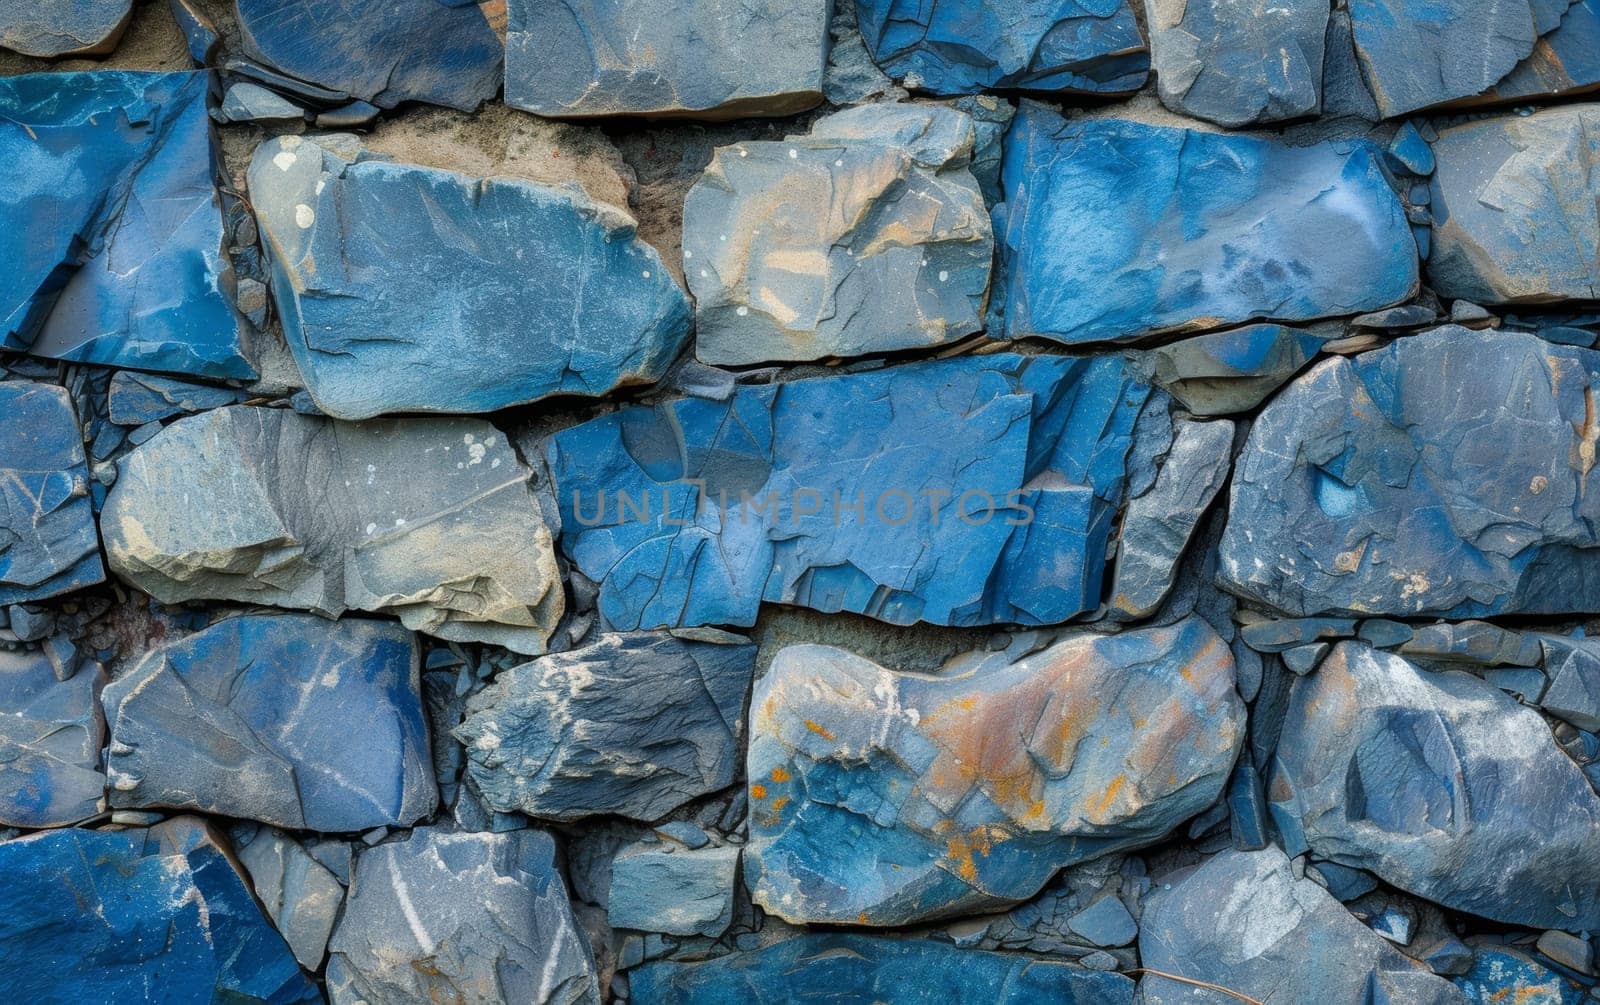 Close-up view of a wall made of irregularly shaped stones in various shades of blue